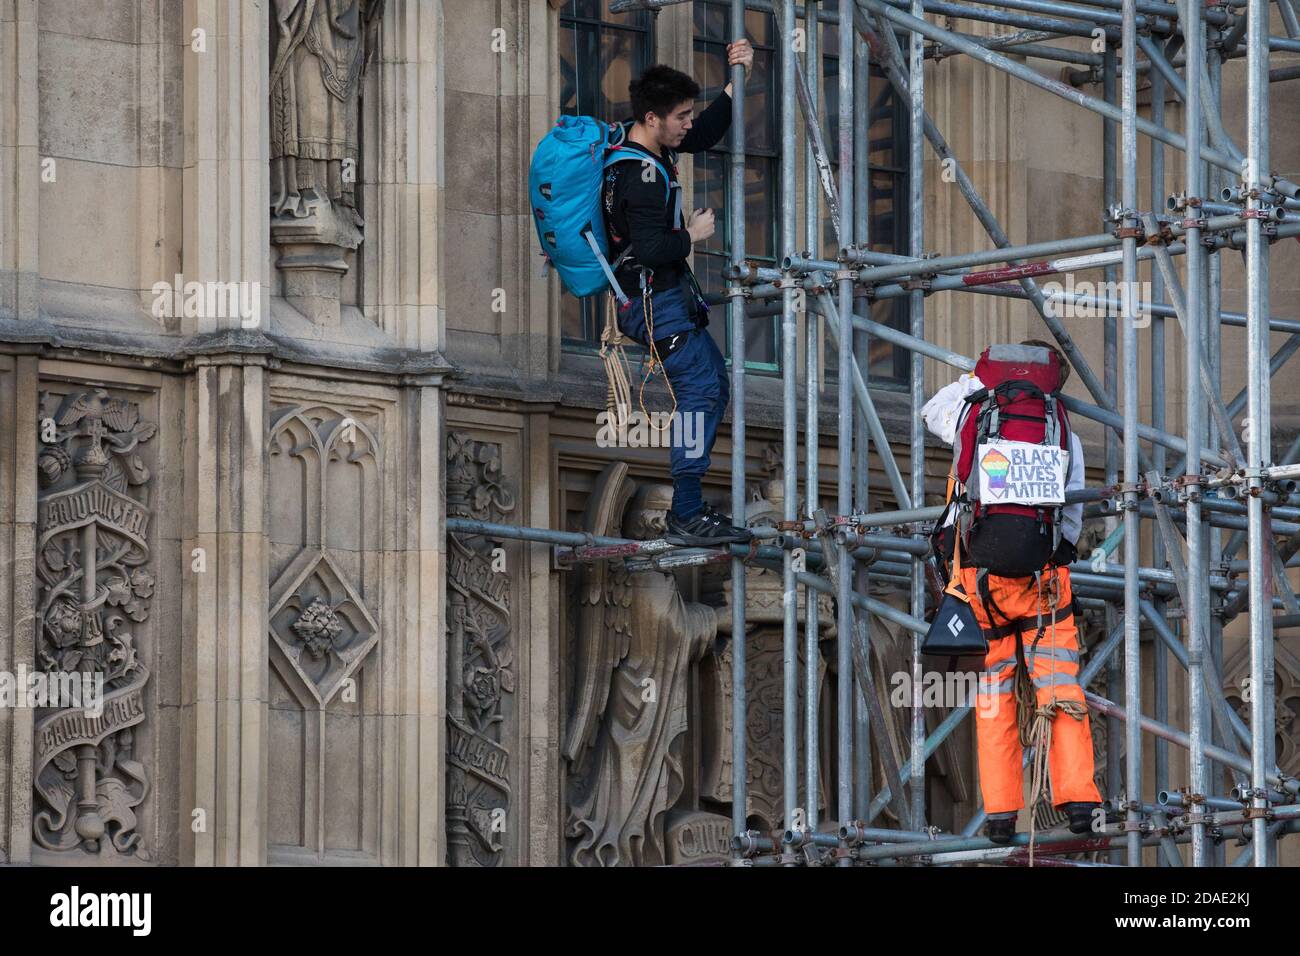 London, UK. 12th November, 2020. Activists from the group Action for Climate Truth and Reparations (ACTR) climb scaffolding to hang an open letter to the UK people from Africans Rising For Justice, Peace and Dignity from the Houses of Parliament. The letter, which launches Africans Rising’s ReRight History campaign, contains a plea to the UK people to start making amends for the harm caused by slavery and colonialism.  Credit: Mark Kerrison/Alamy Live News Stock Photo